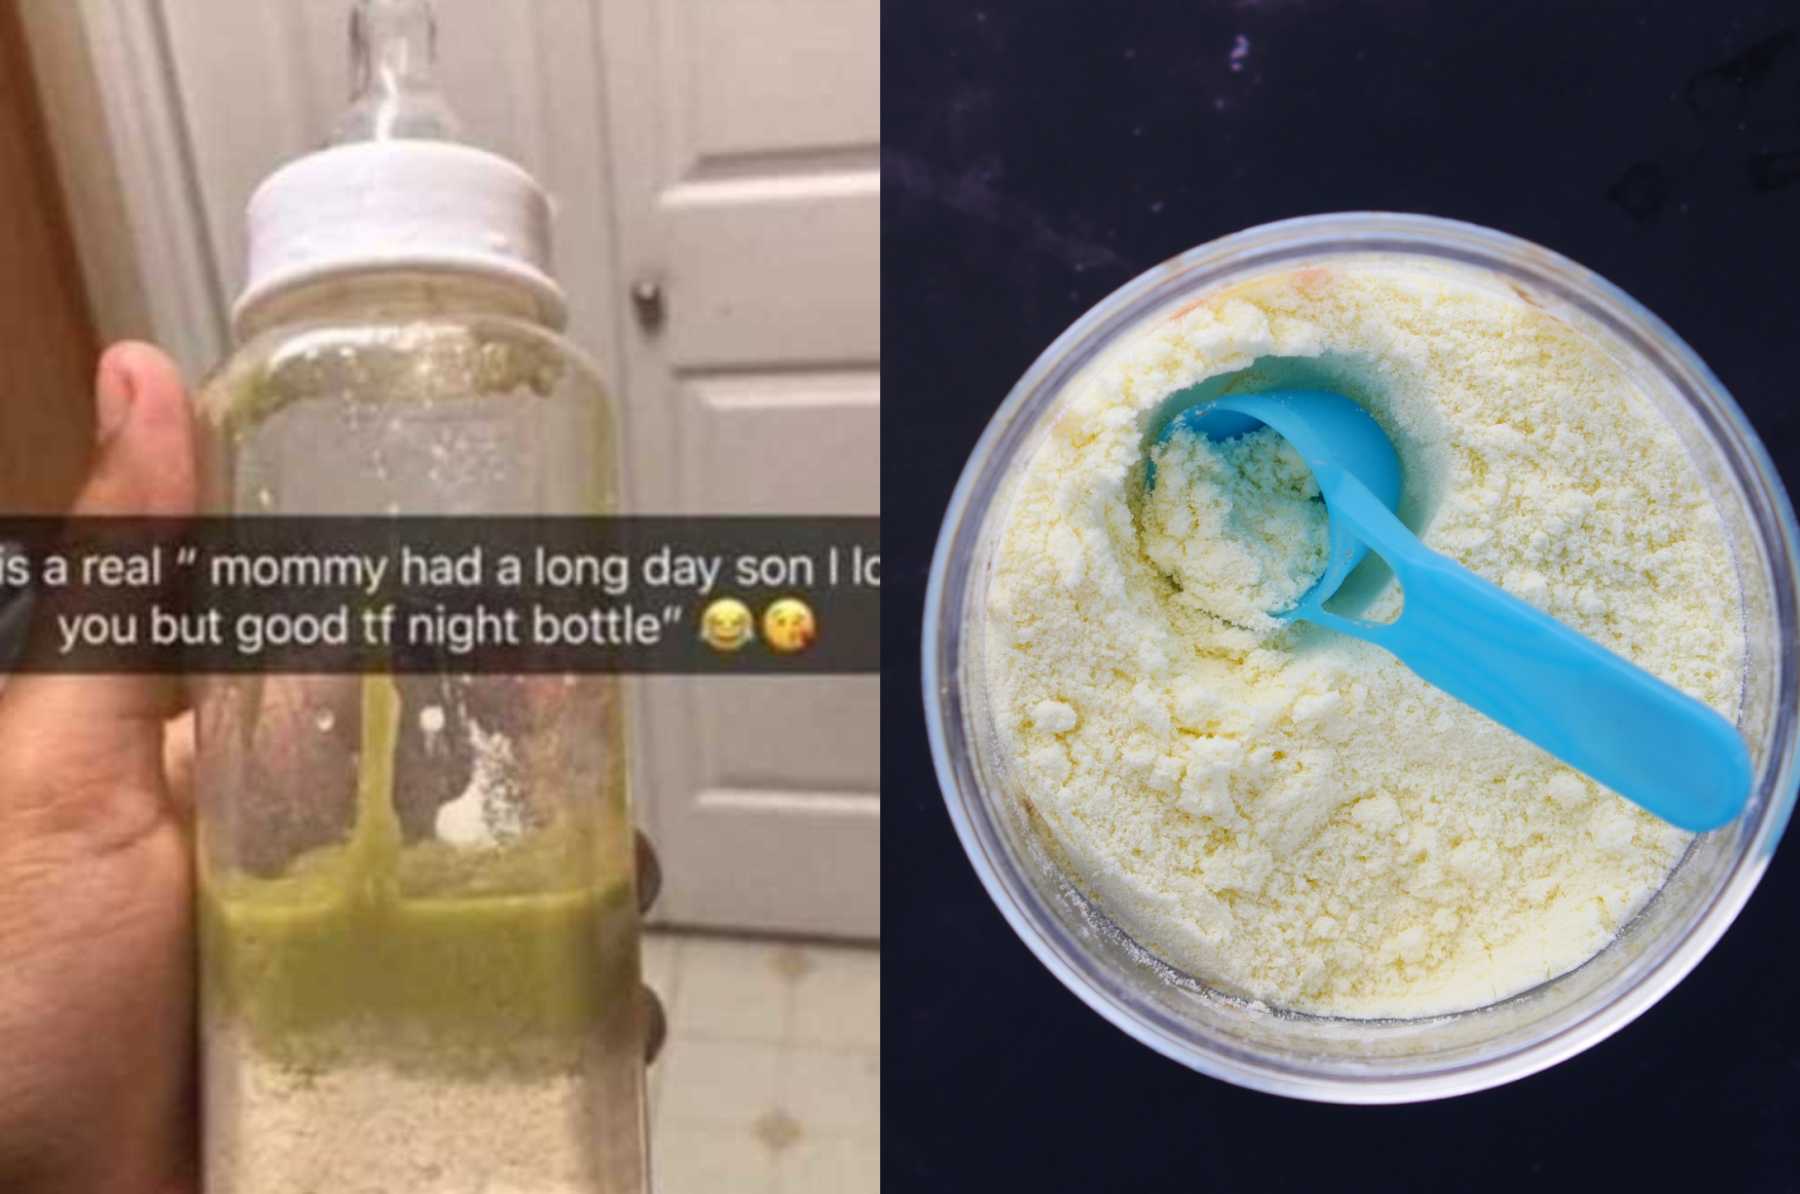 Is It Safe to Put Rice Cereal in a Baby's Bottle?